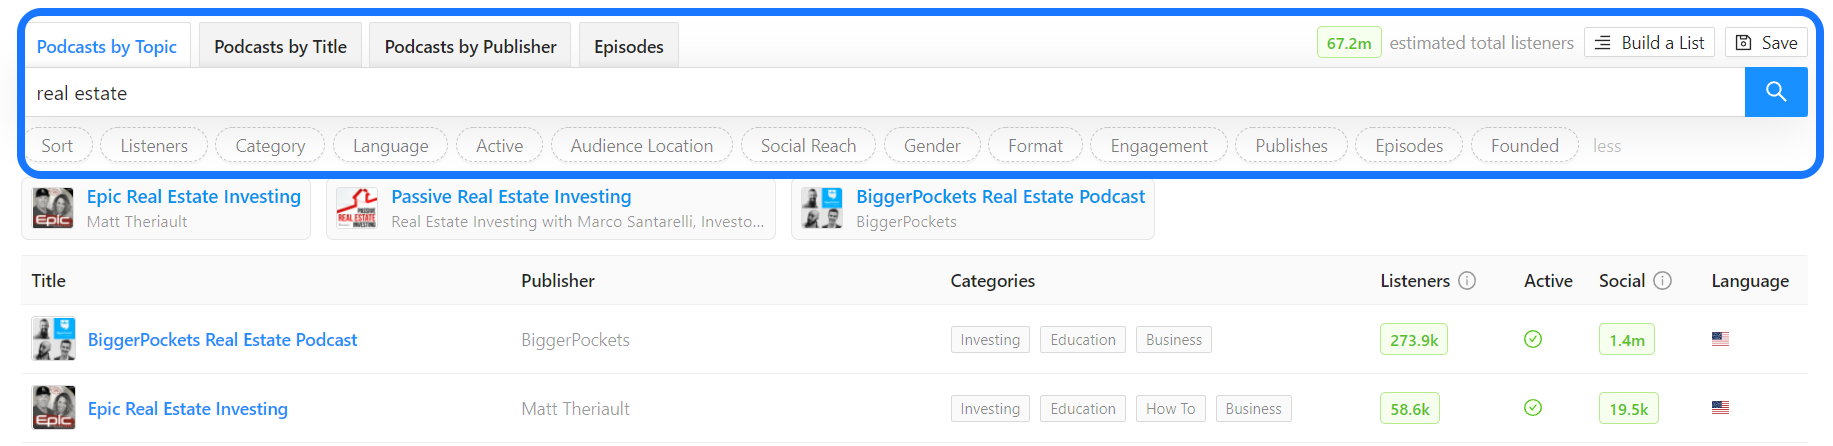 Searching for real estate podcasts in Rephonic